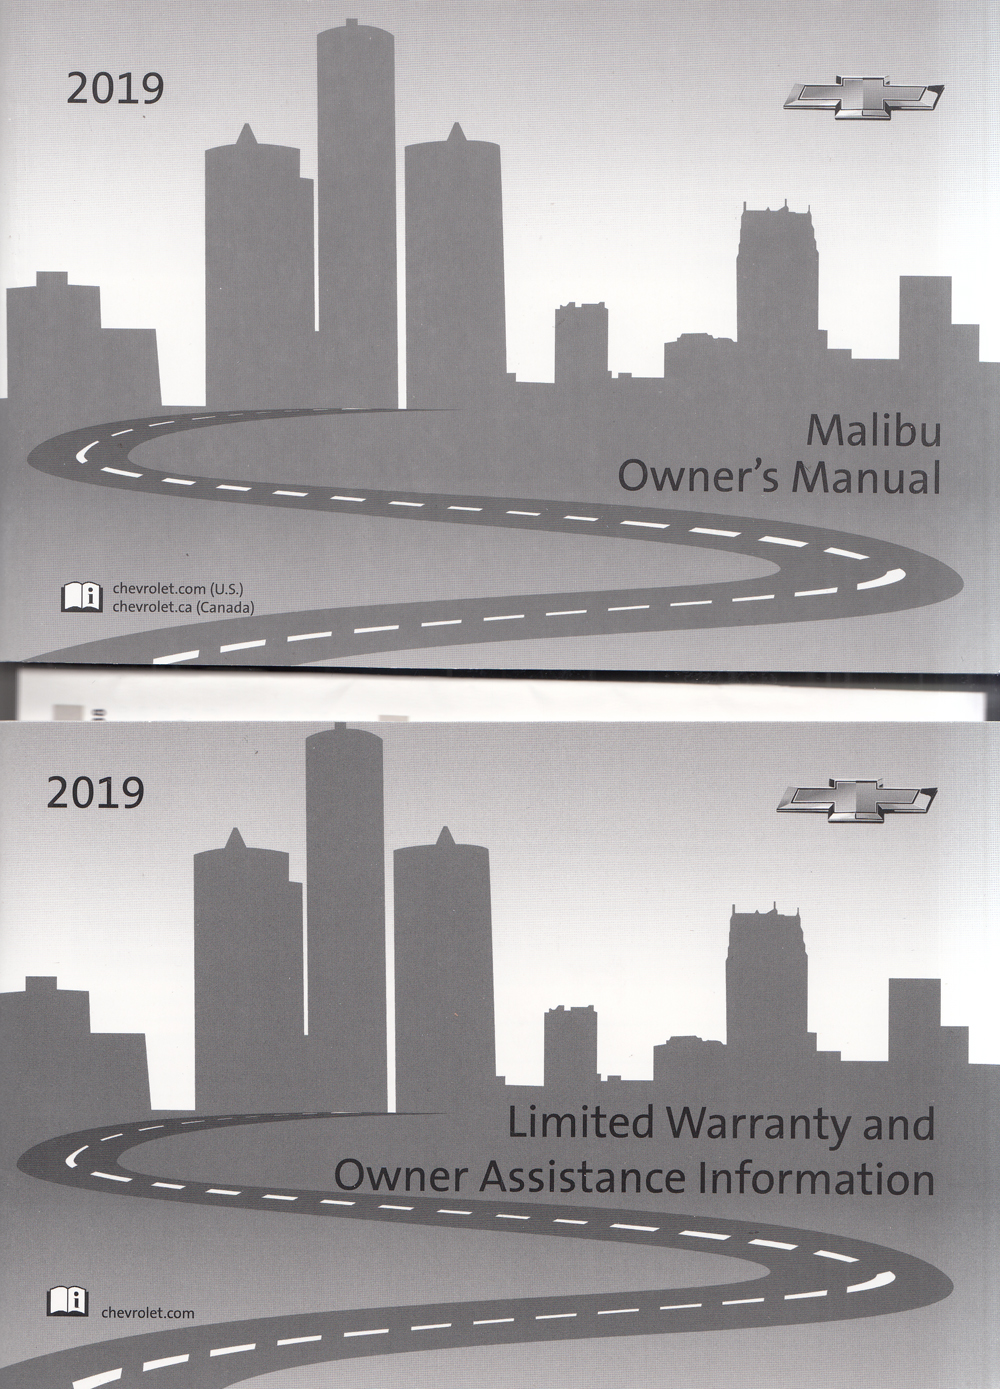 2019 Chevrolet Malibu Owners Manual with Pamphlets Original